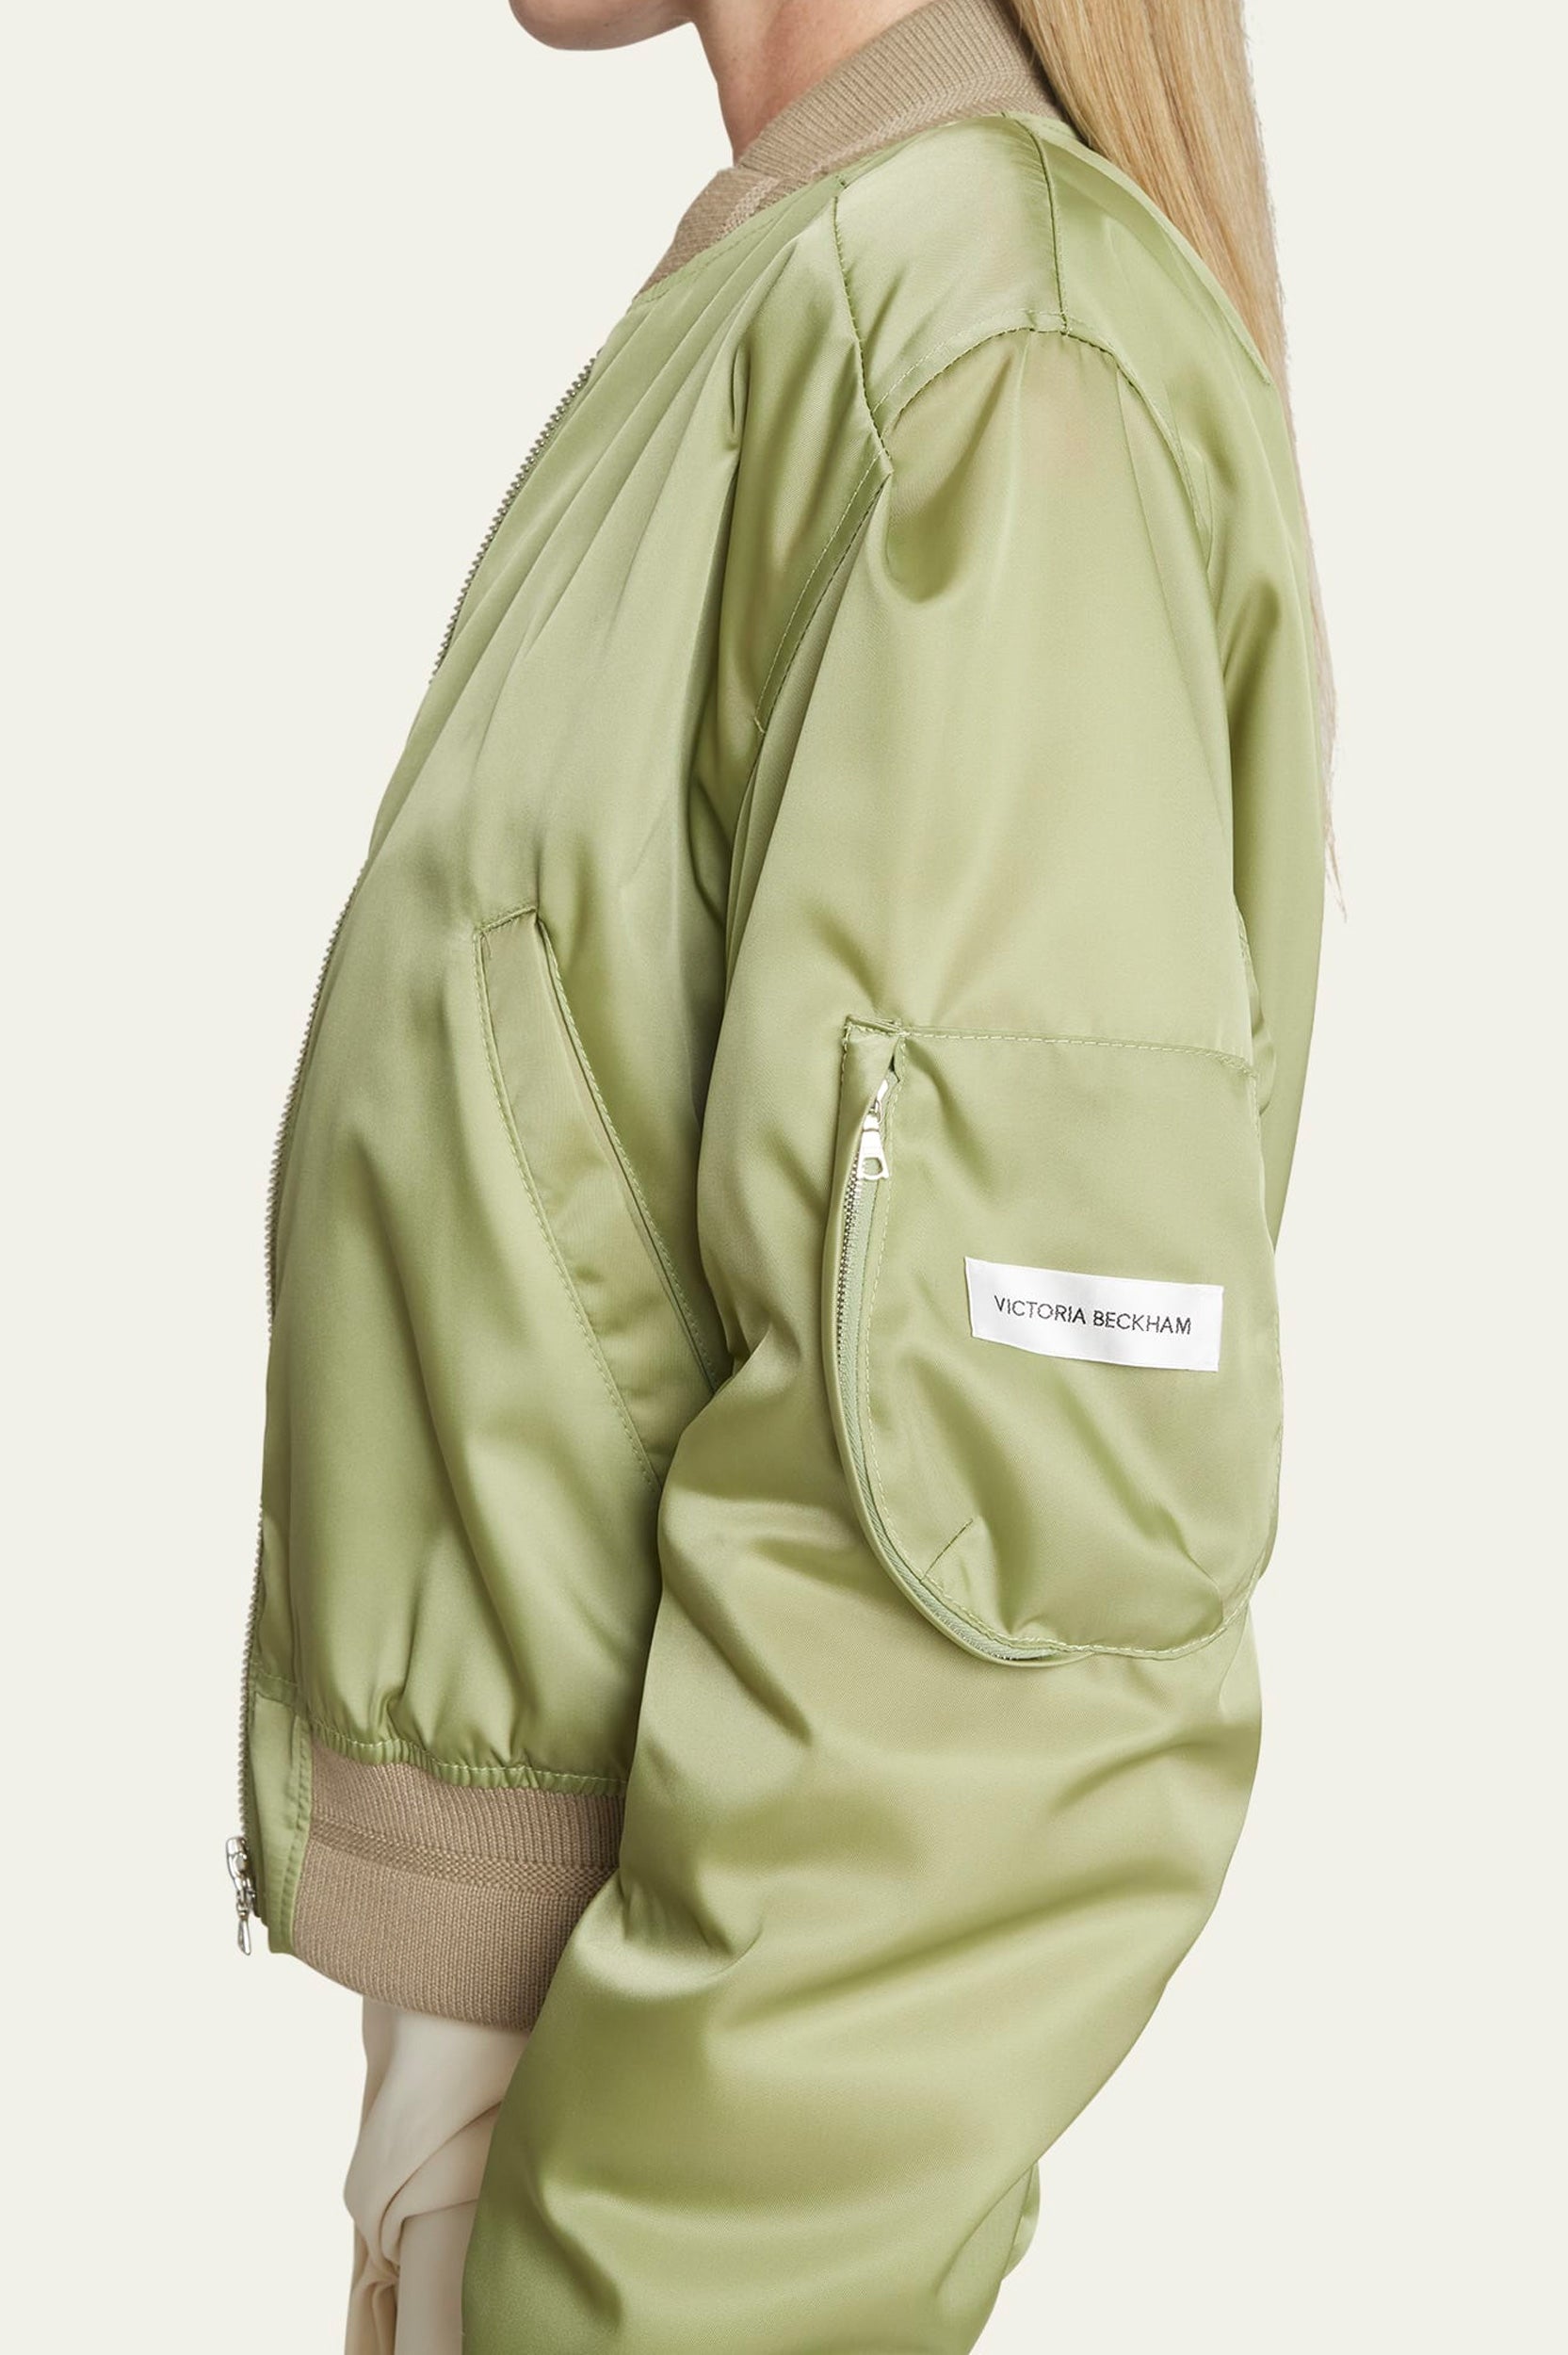 Cropped Bomber Jacket in Avacado